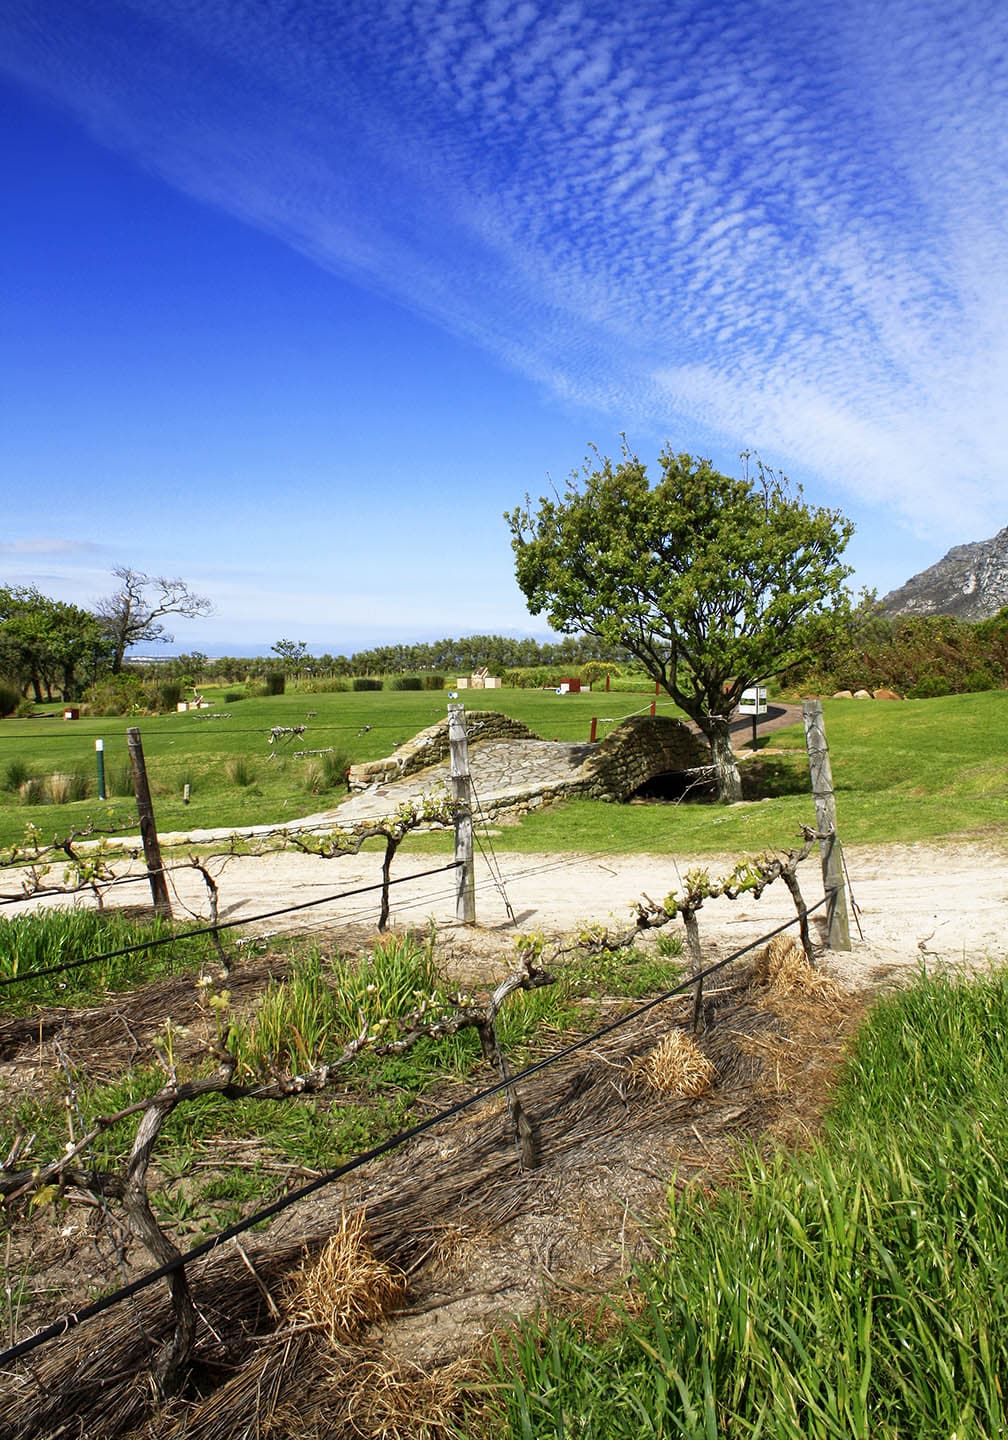 Golf course at Steenberg Mountains in the Constantia Valley